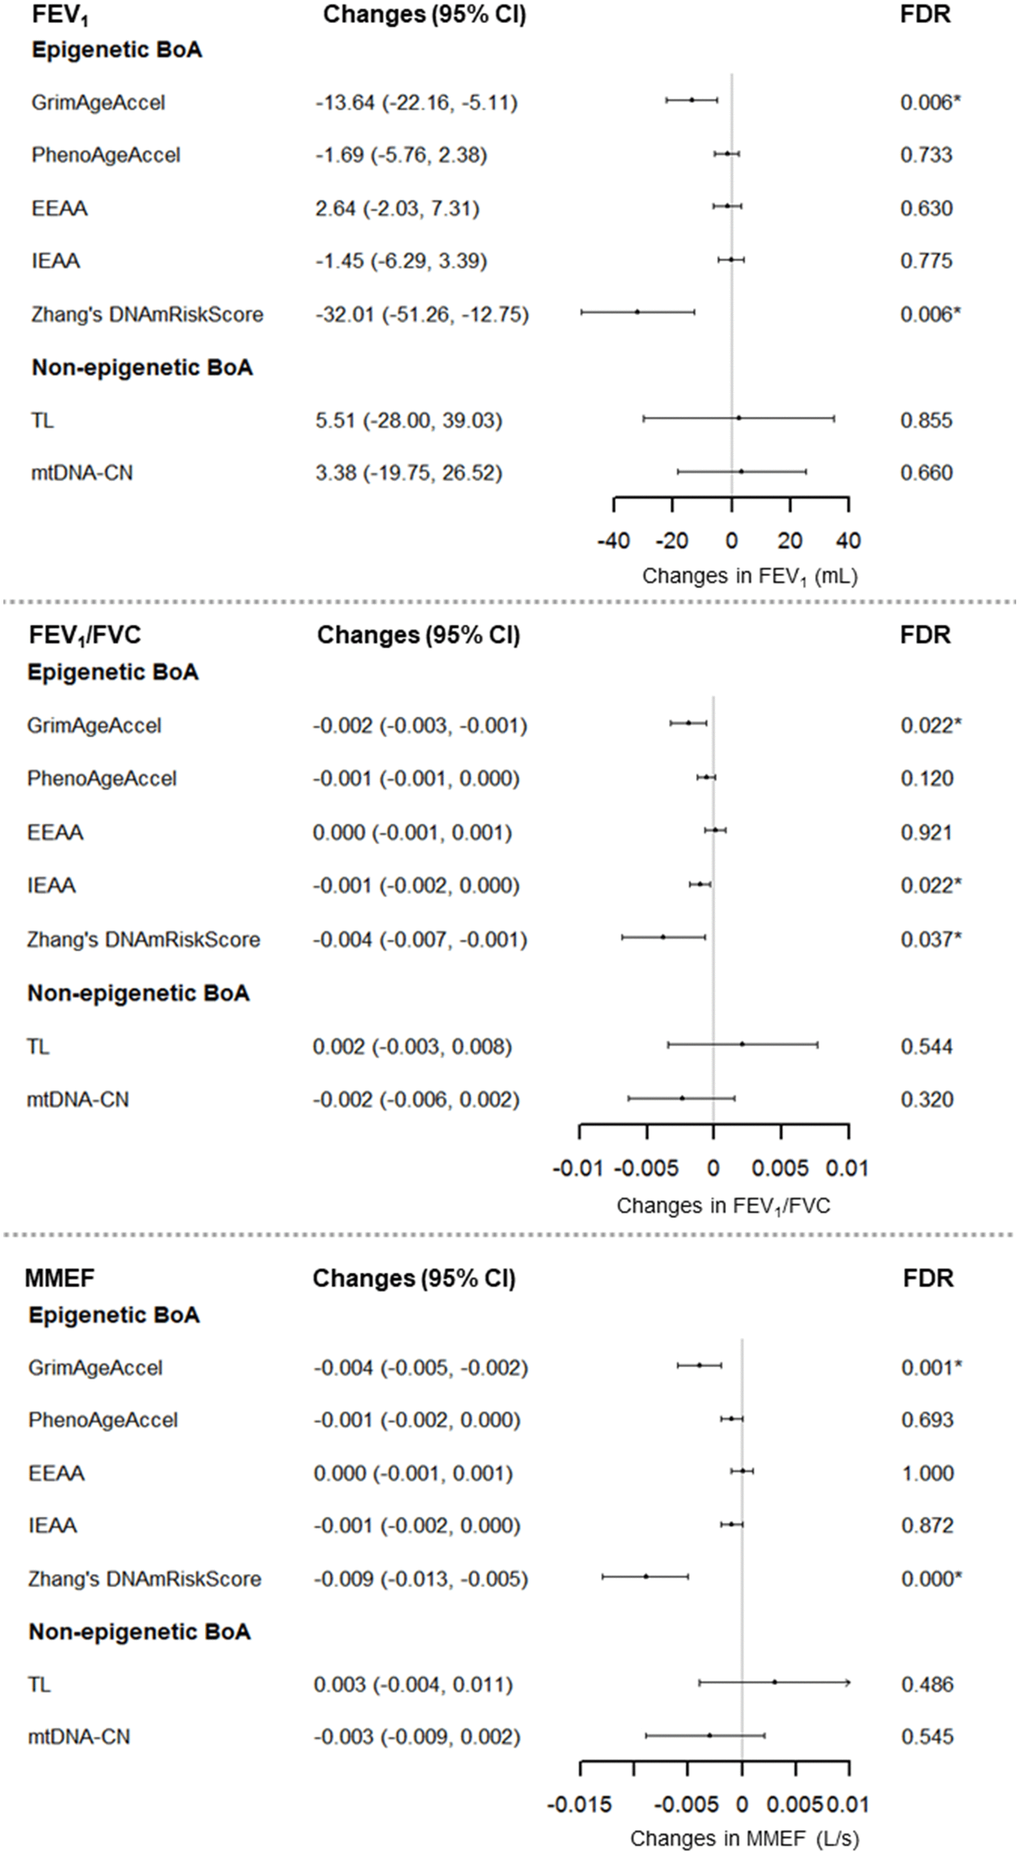 Associations between Seven BoAs and lung function for 696 men (1,070 visits), the NAS, 1999-2013. For GrimAgeAccel, PhenoAgeAccel, TL, and mtDNA-CN, we adjusted for chronological age, BMI, height, smoking status, cigarette pack-years, years of education, corticosteroid use, estimated cell types, and batch effects. For EEAA and IEAA, we adjusted for chronological age, BMI, height, smoking status, cigarette pack-years, years of education, corticosteroid use, and batch effects. For Zhang’s DNAmRiskScore, we adjusted for chronological age, BMI, height, smoking status, cigarette pack-years, years of education, corticosteroid use, estimated cell types, batch effects, and technical covariates: Non polymorphic Red, Specificity I Red, Bisulfite Conversion I Red, Bisulfite Conversion II, Extension Red. Abbreviations: IEAA = intrinsic epigenetic age acceleration; EEAA = extrinsic epigenetic age acceleration; TL = Telomere length; mtDNA-CN = mitochondrial DNA copy number; BoA = biomarkers of aging; BMI = body mass index; FDRB-H = Benjamin-Hochberg false discovery rate.